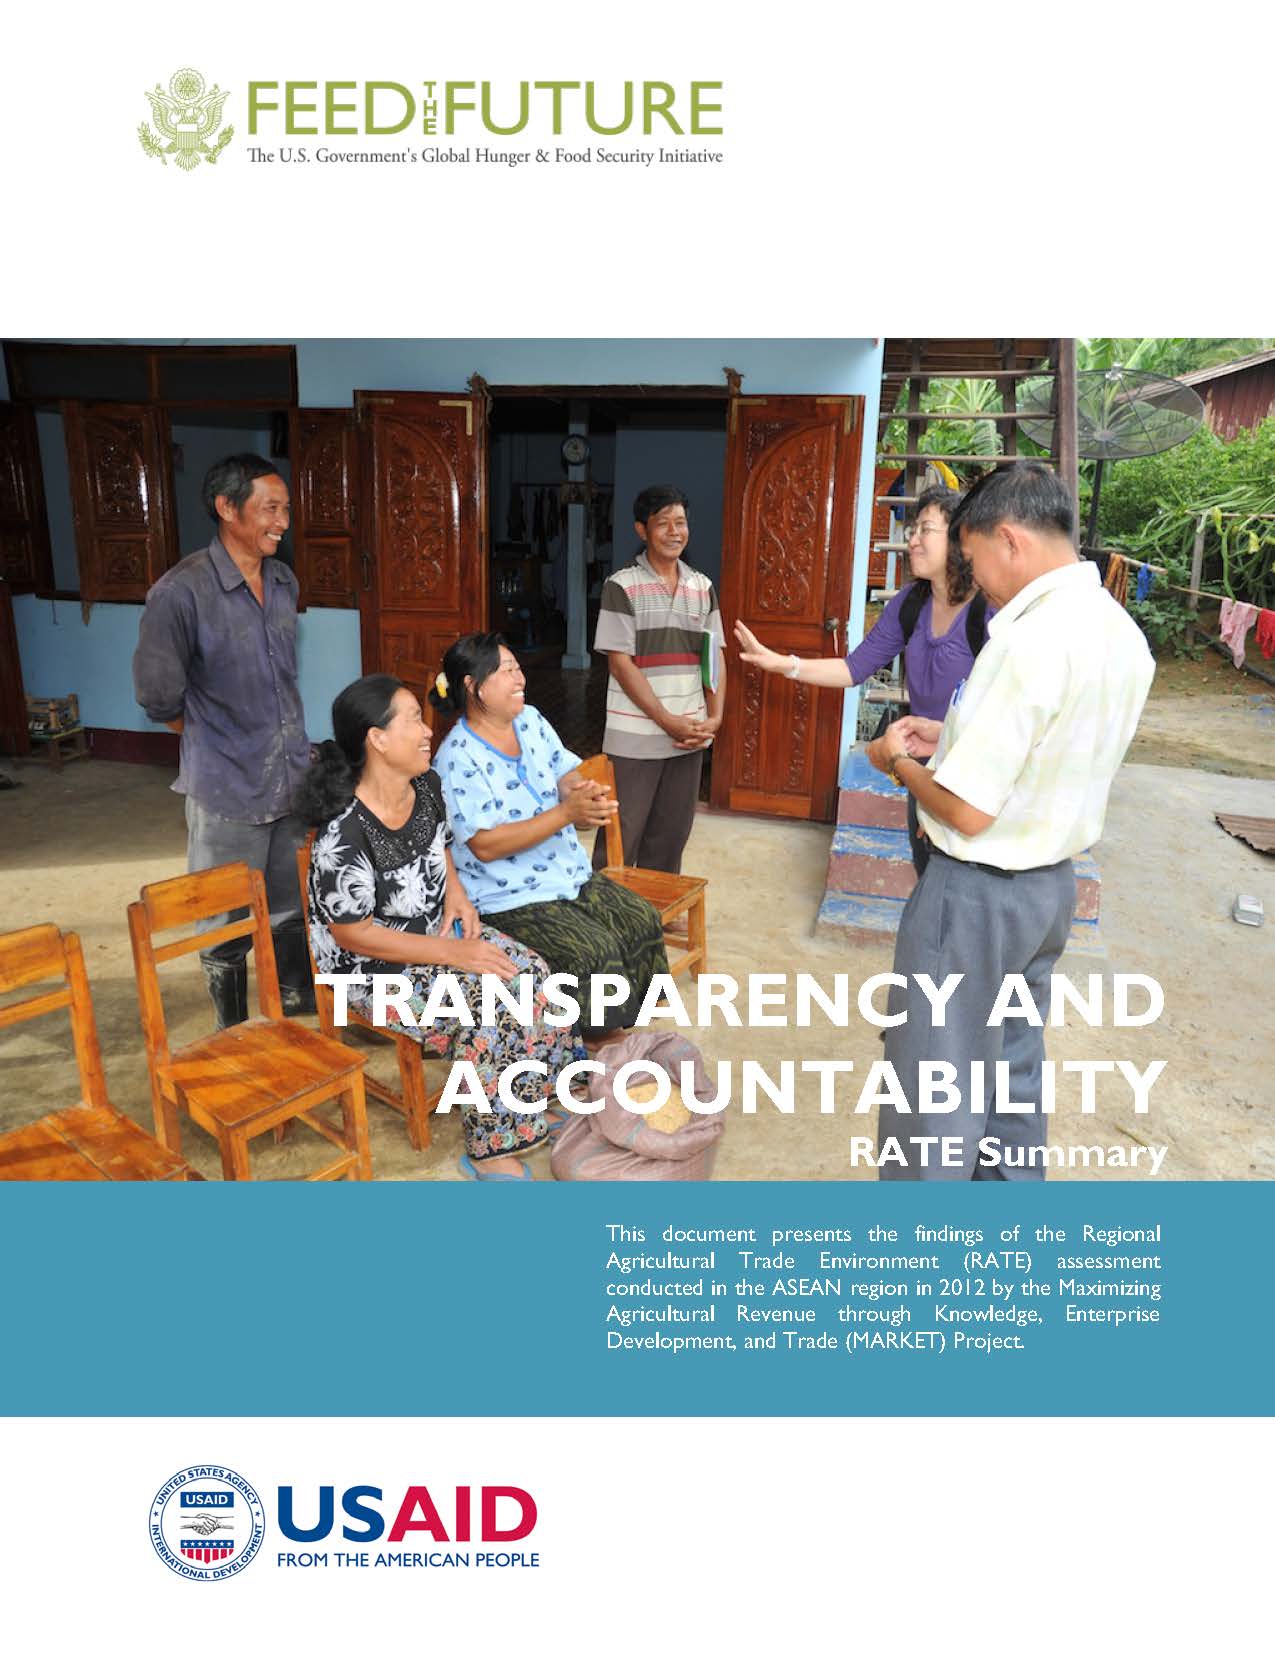 Regional Agriculture Trade Environment Transparency and Accountability Report